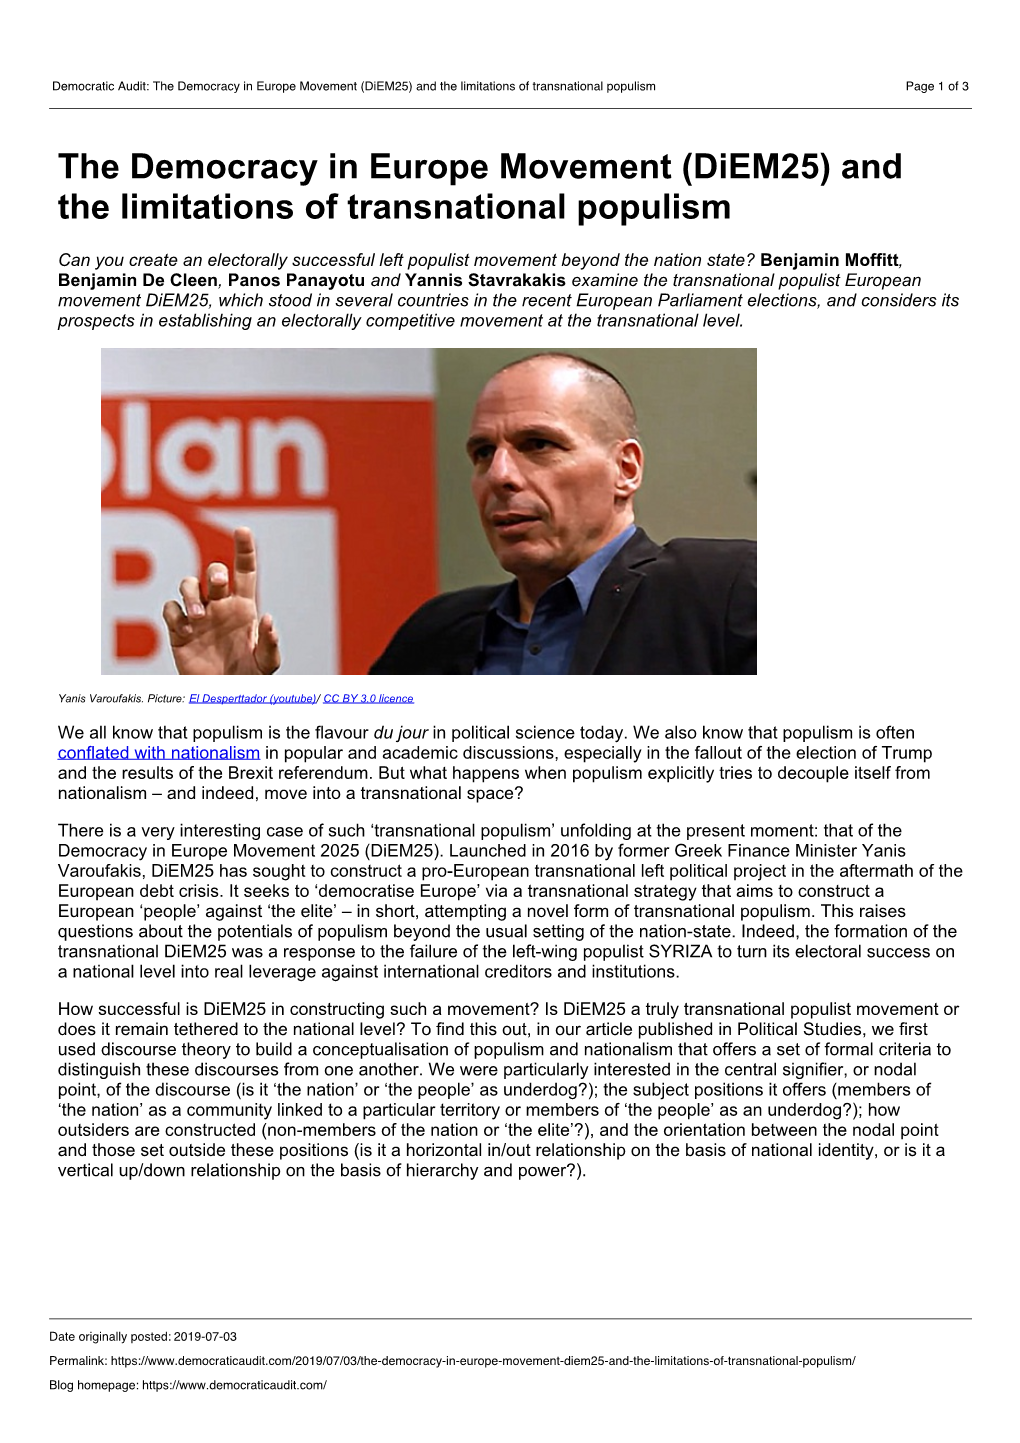 The Democracy in Europe Movement (Diem25) and the Limitations of Transnational Populism Page 1 of 3